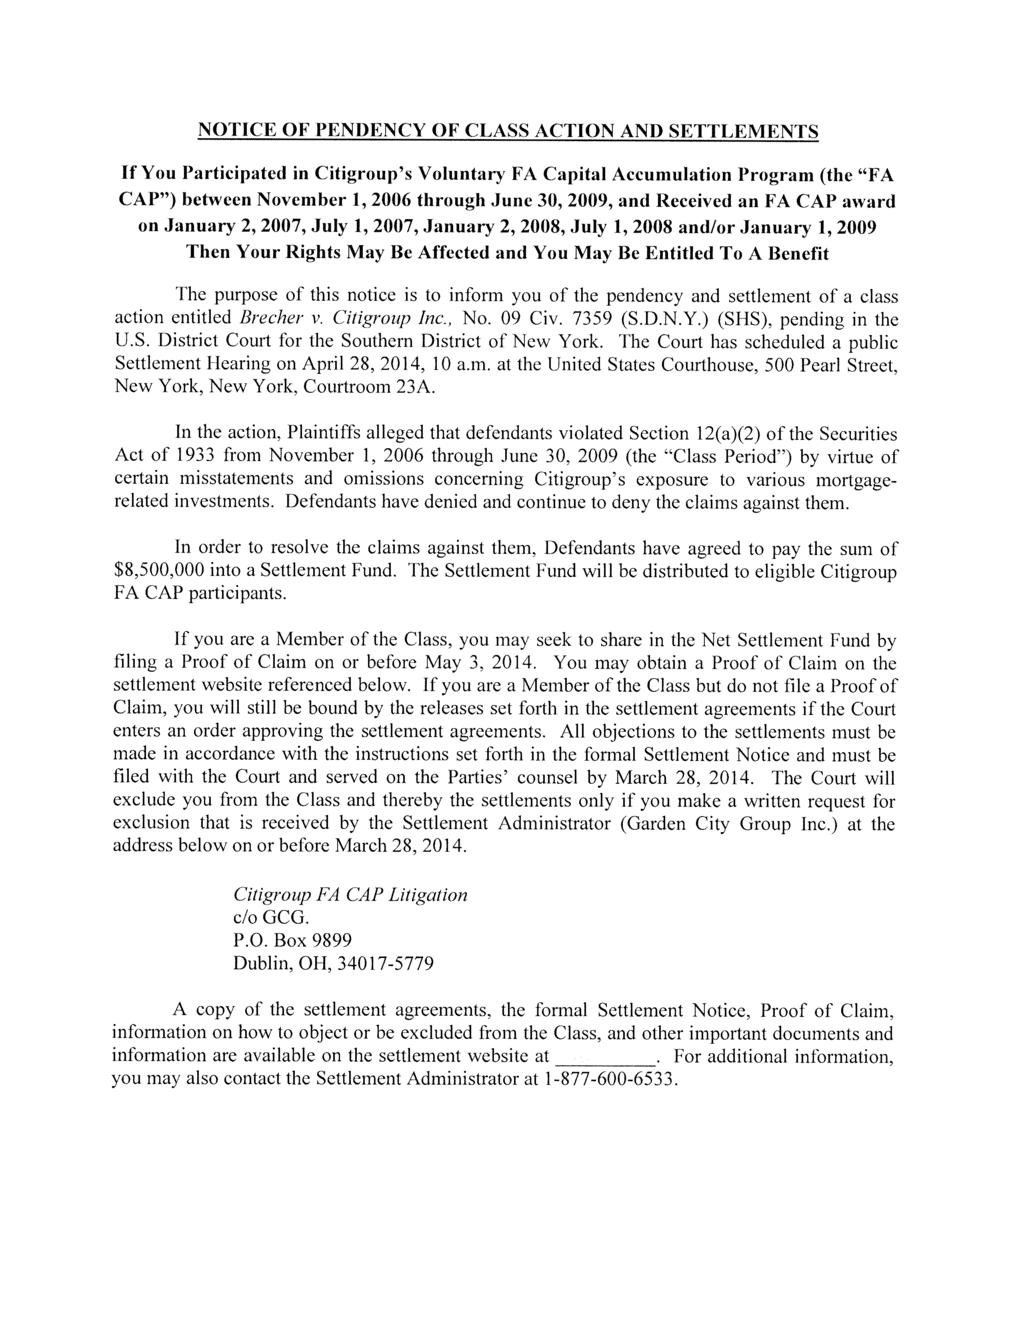 . Case 1:09-cv-07359-SHS Document 50-1 Filed 01/22/14 Page 65 of 91 NOTICE OF PENDENCY OF CLASS ACTION AND SETTLEMENTS If You Participated in Citigroup s Voluntary FA Capital Accumulation Program